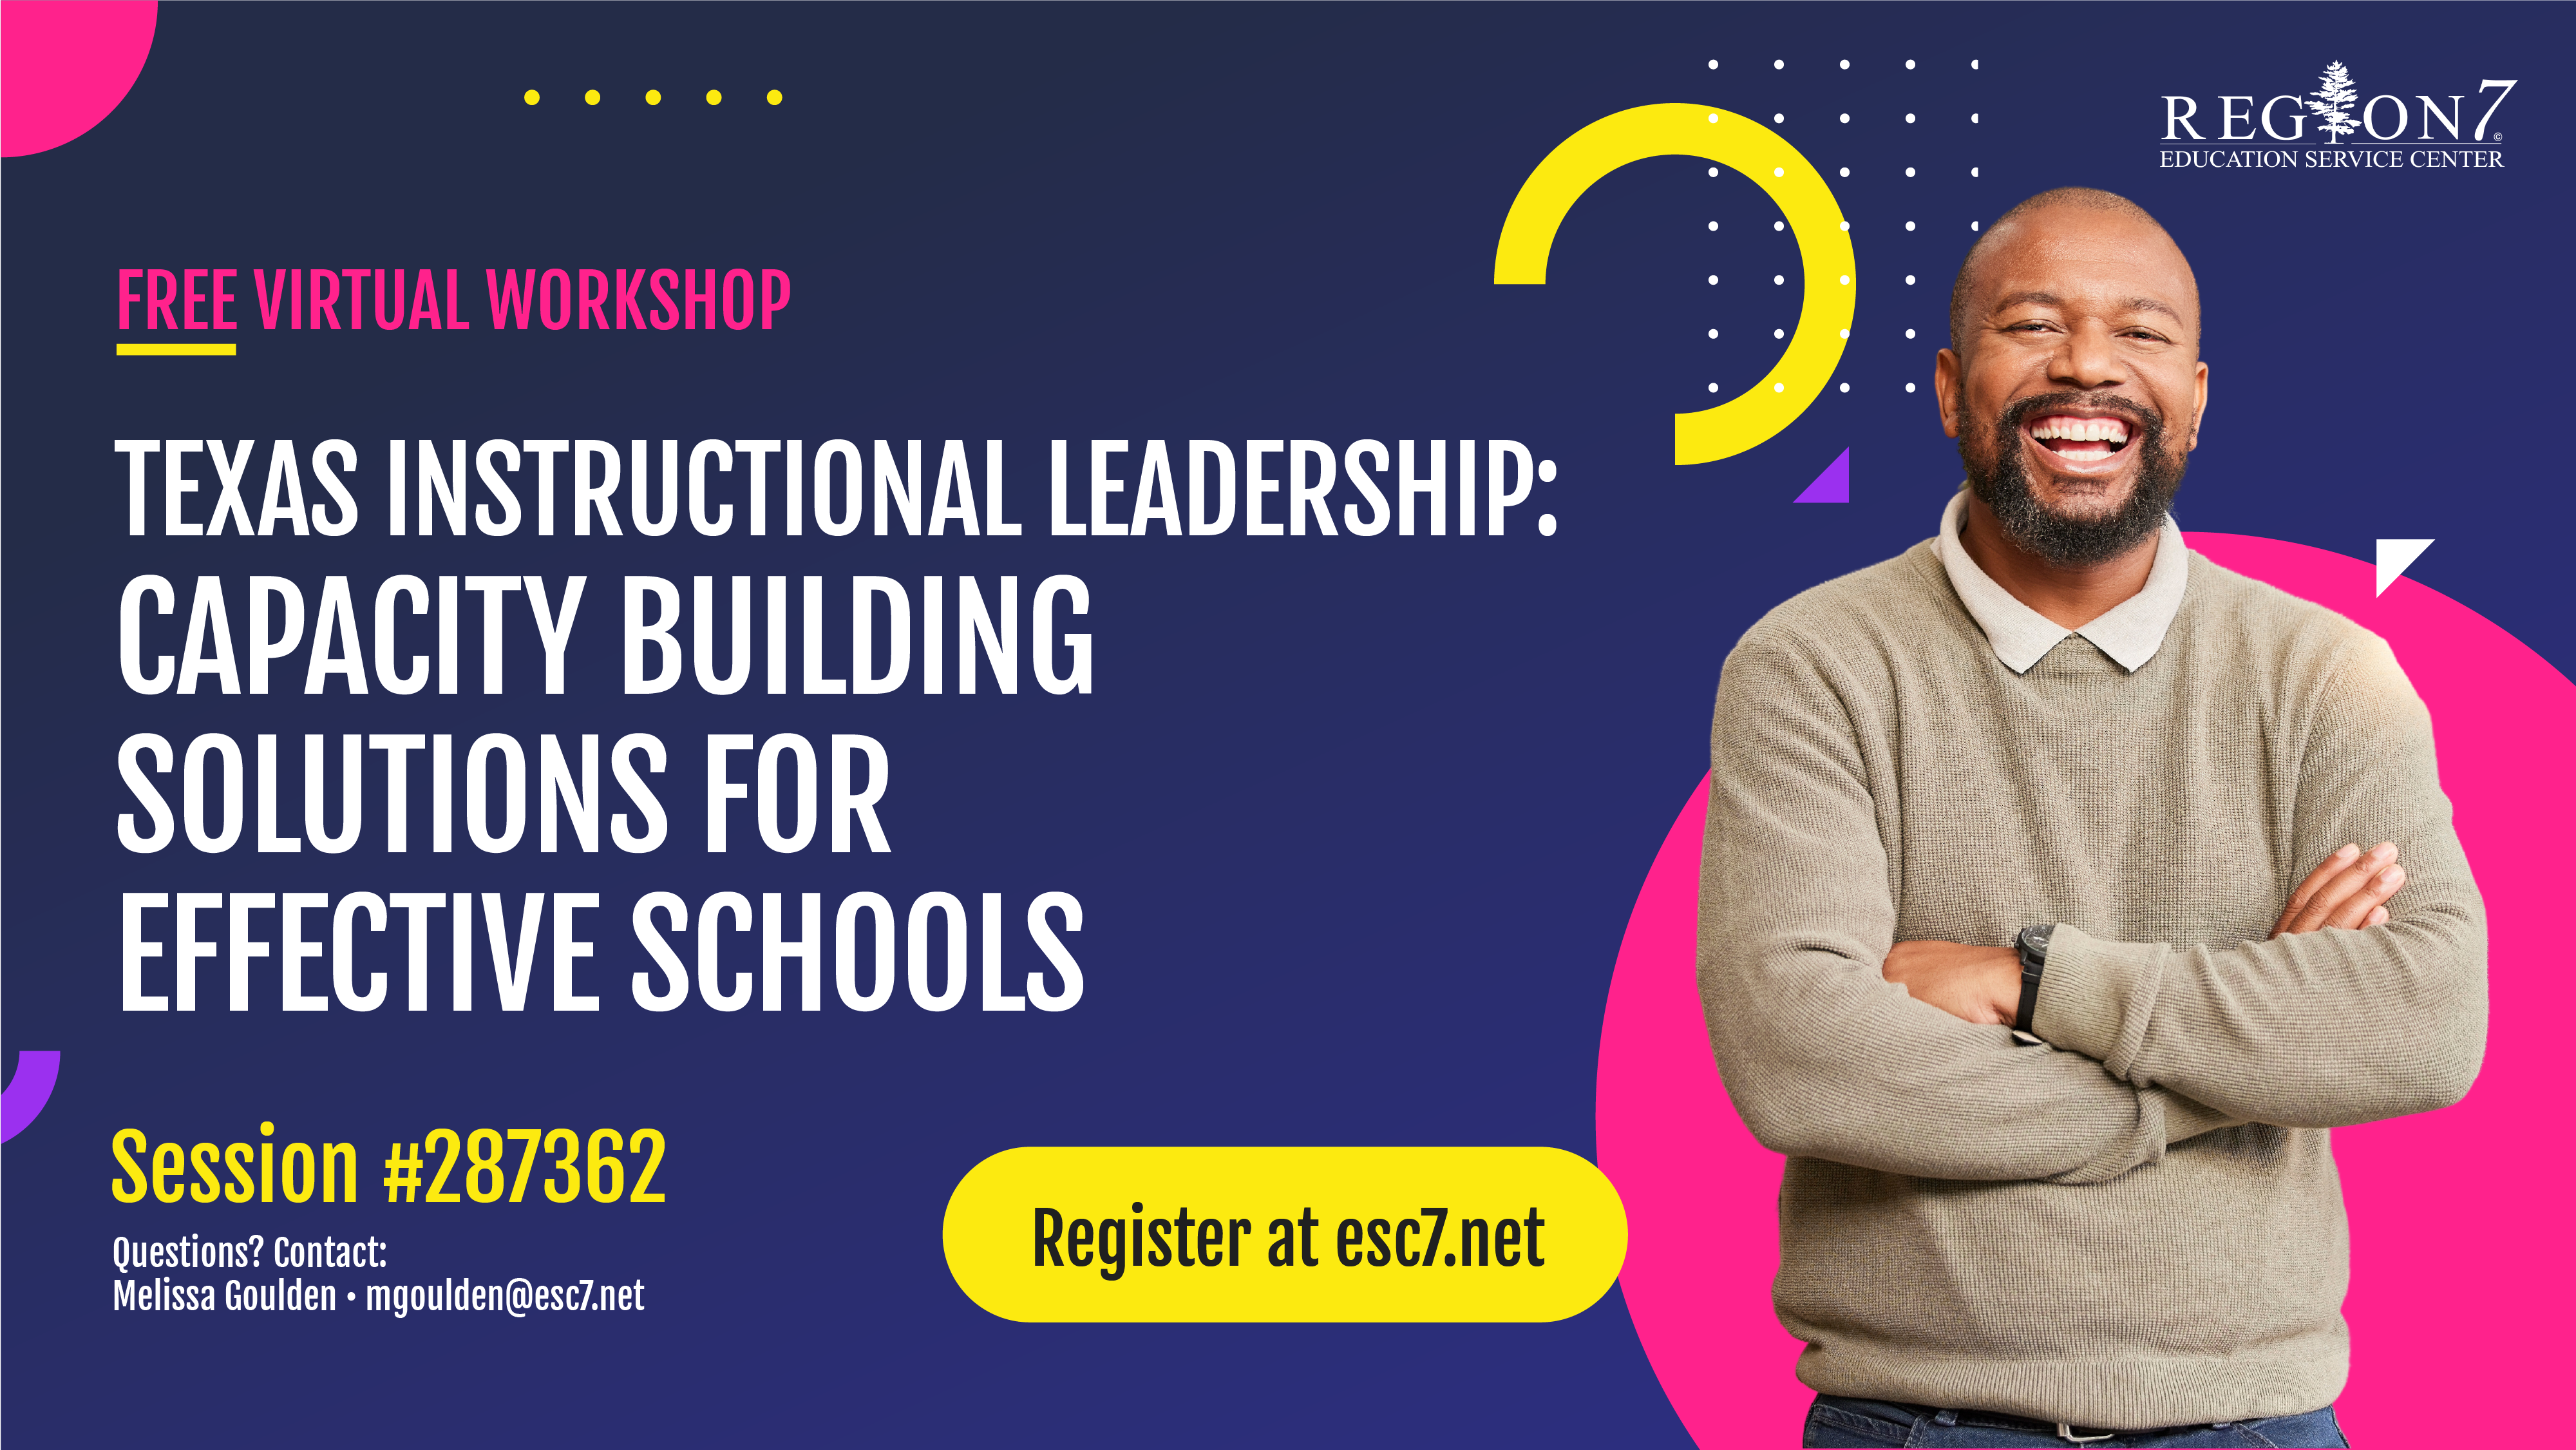 Texas Instructional Leadership: Capacity Building Solutions for Effective Schools